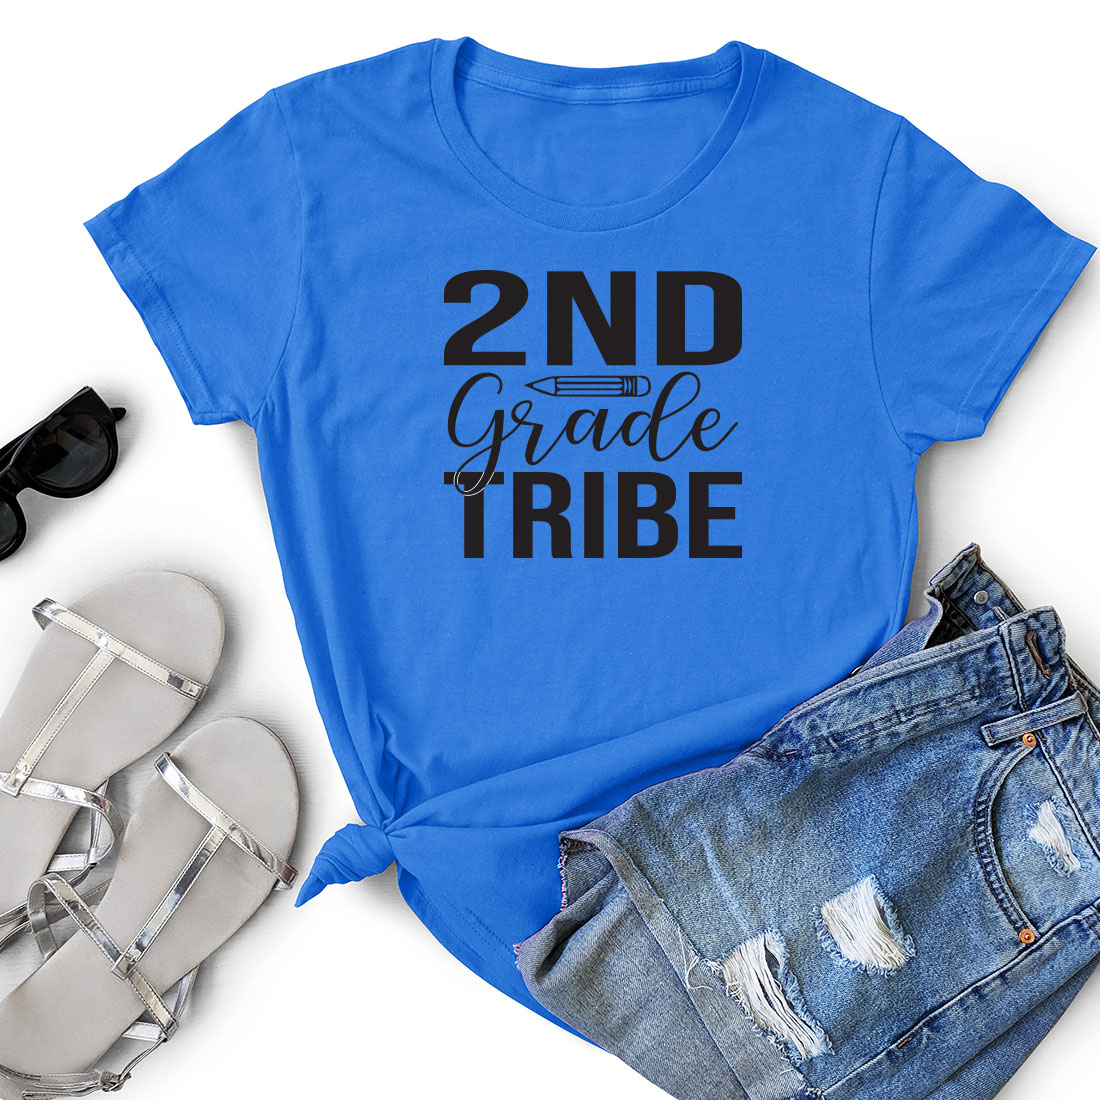 T - shirt that says 2nd grade tribe next to a pair of shorts.